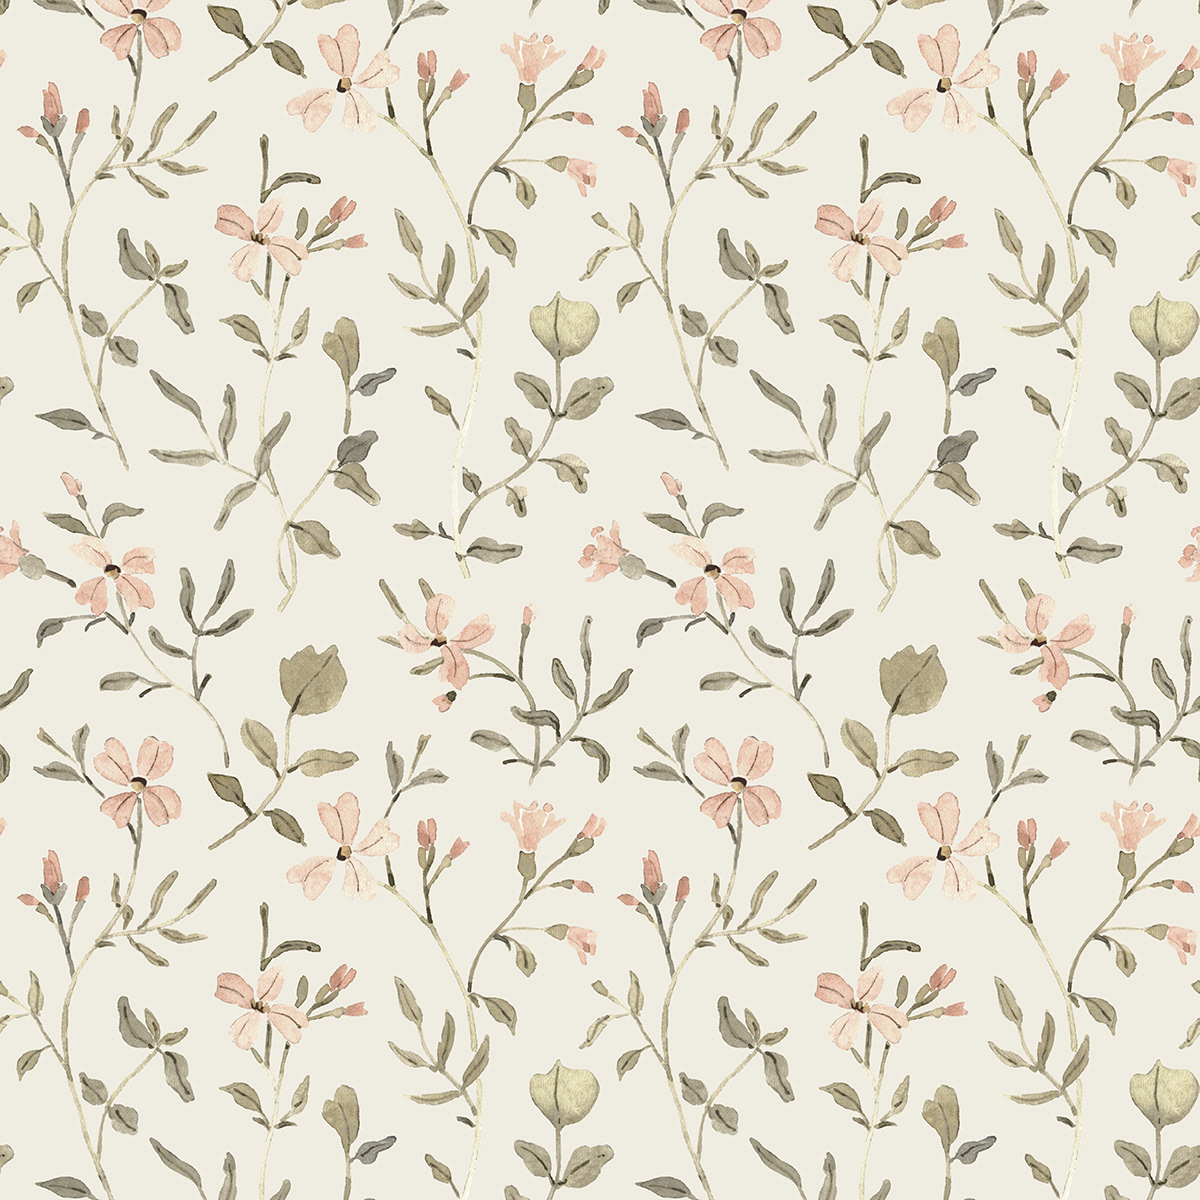 Cuckoo Flowers Surface Pattern, Floral Pattern for Fabrics, Watercolor Illustrations of Flowers